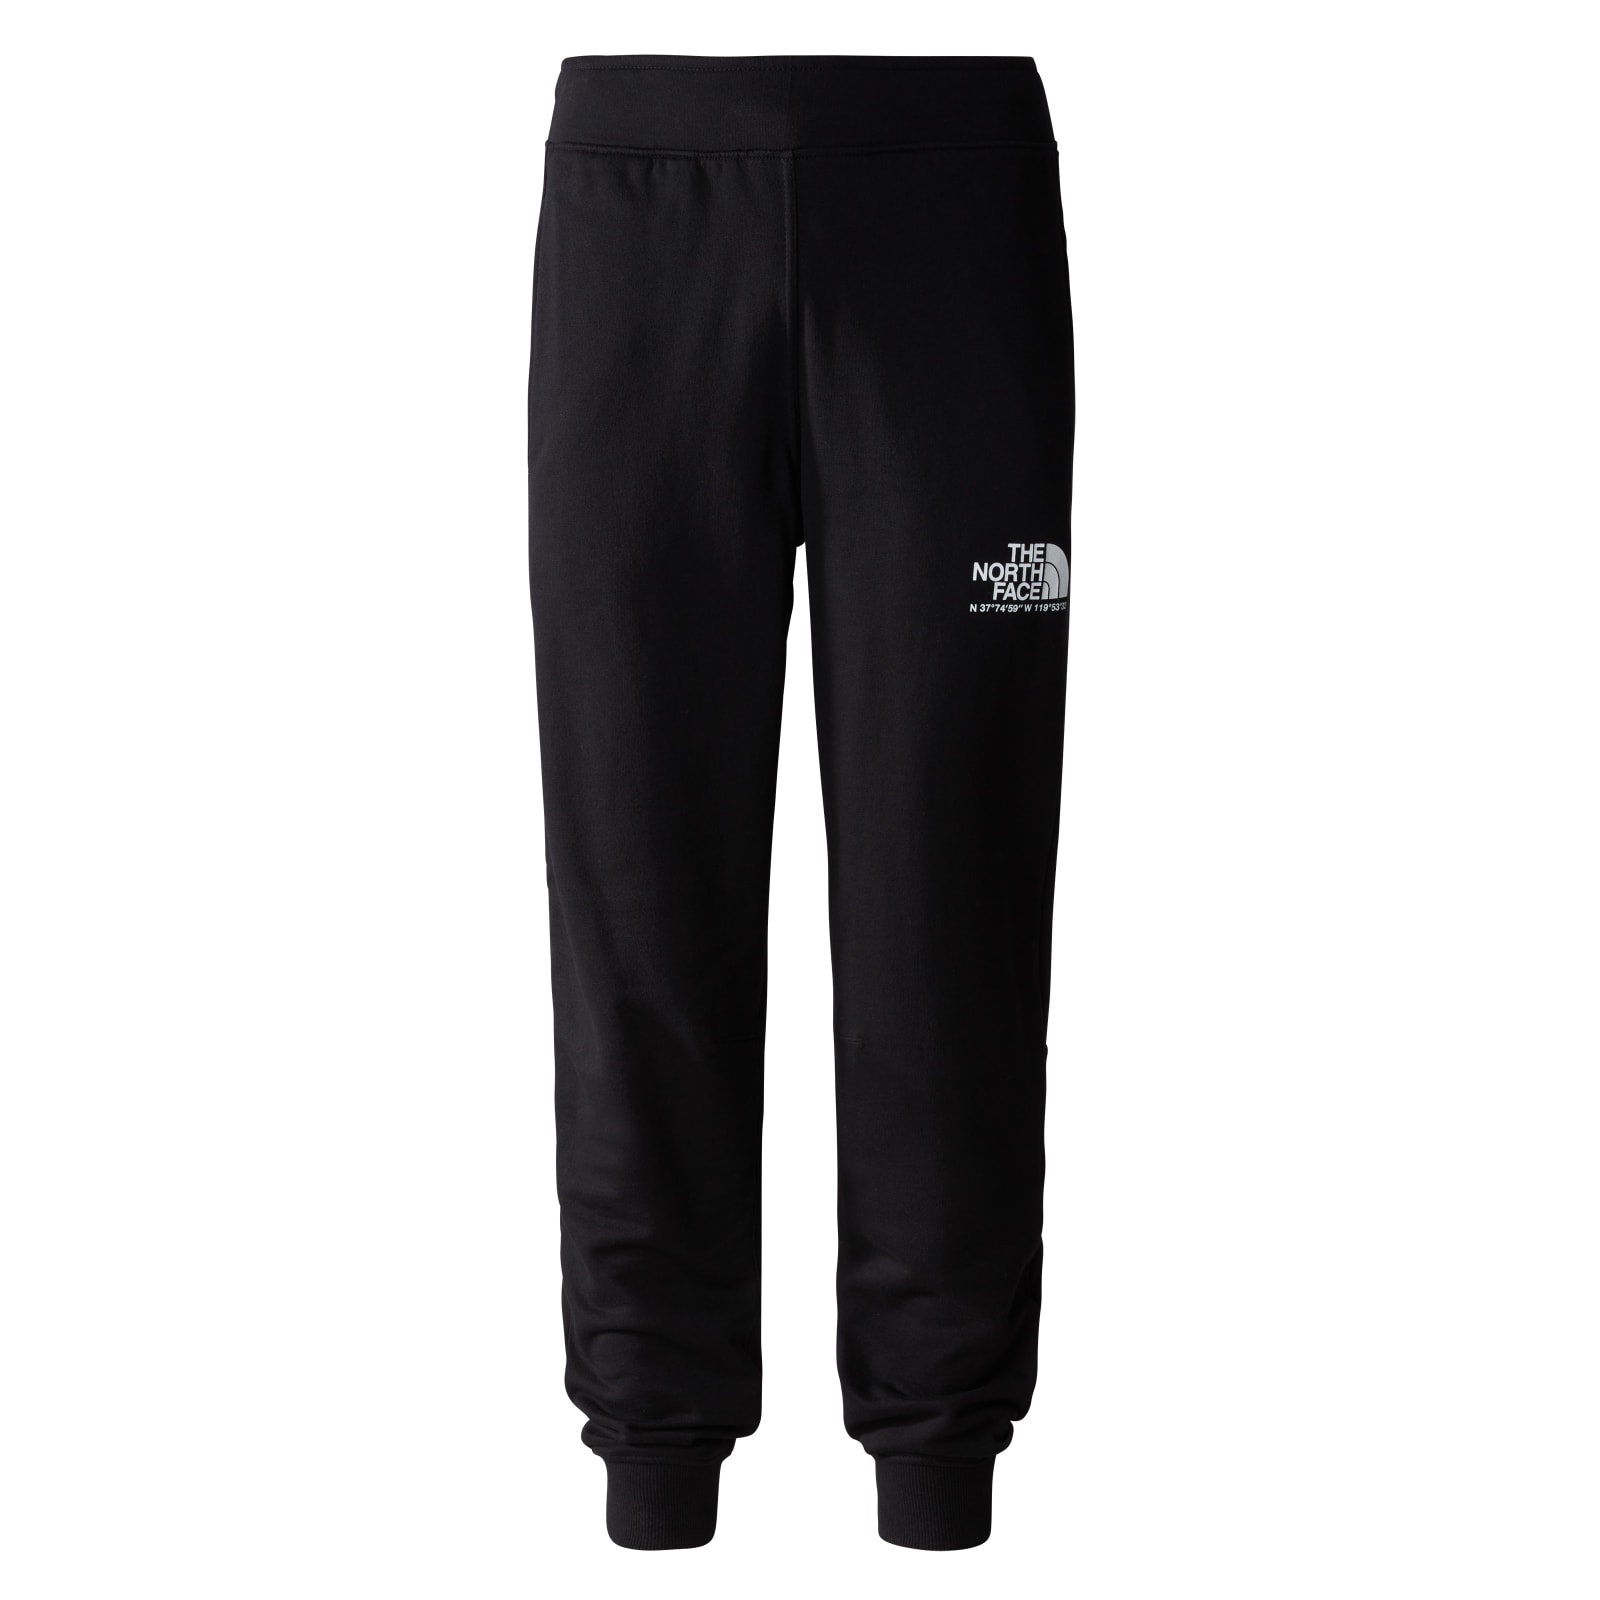 THE NORTH FACE M COORD PANT